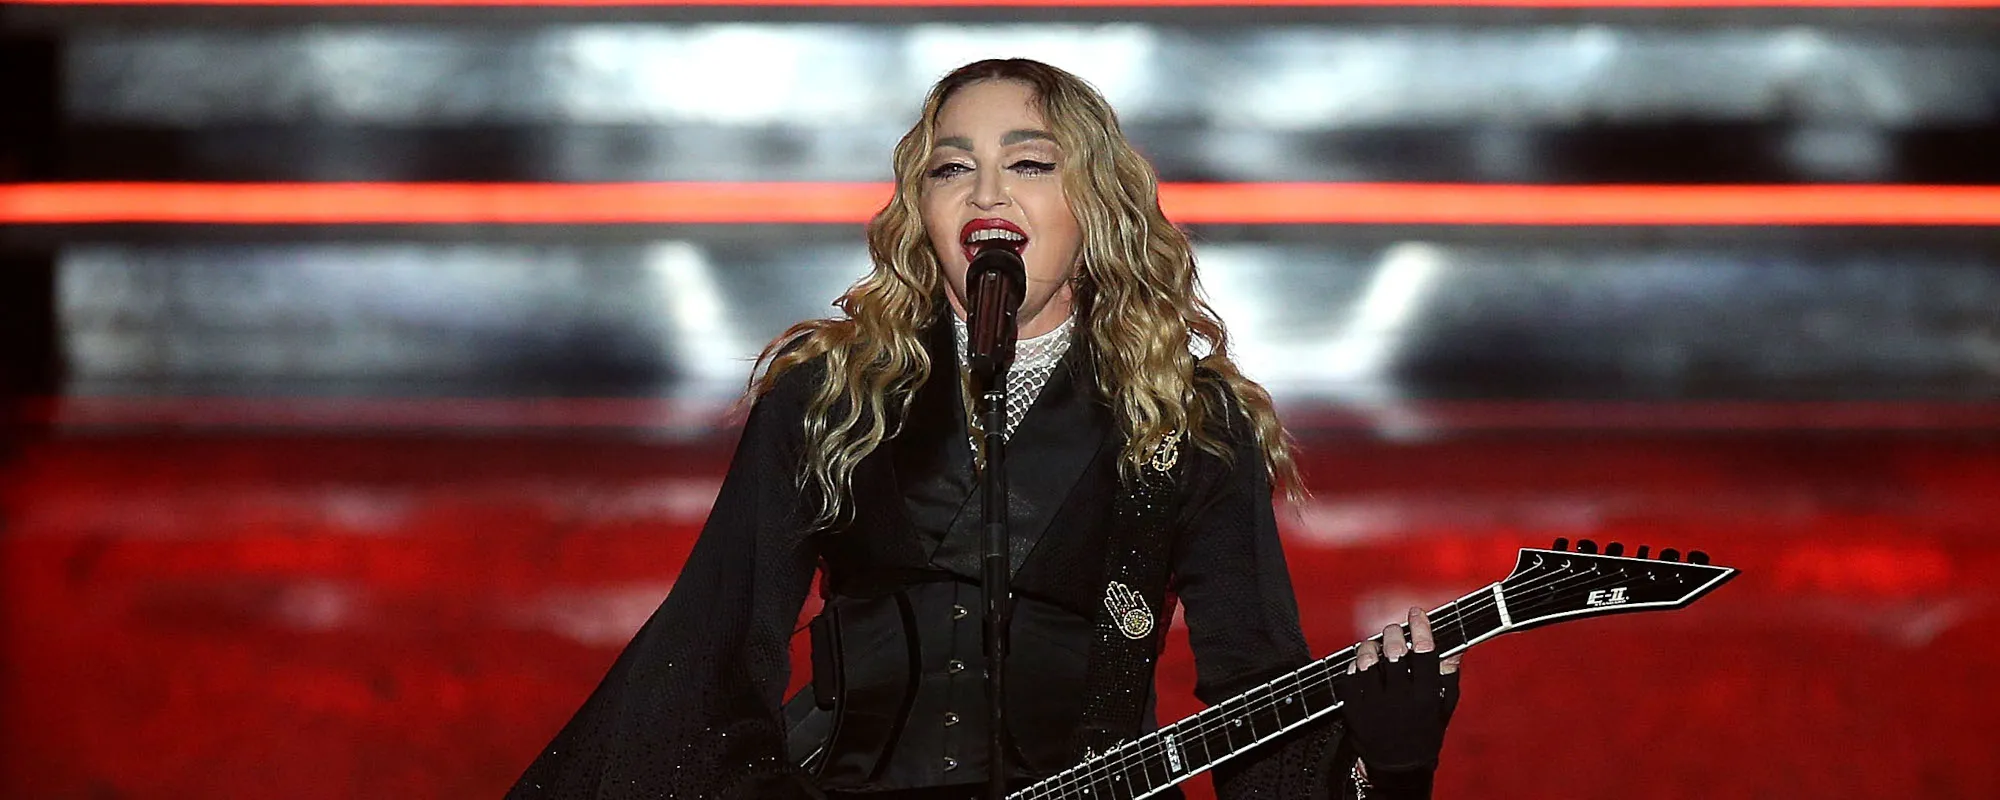 Madonna’s 6 Most Controversial Songs